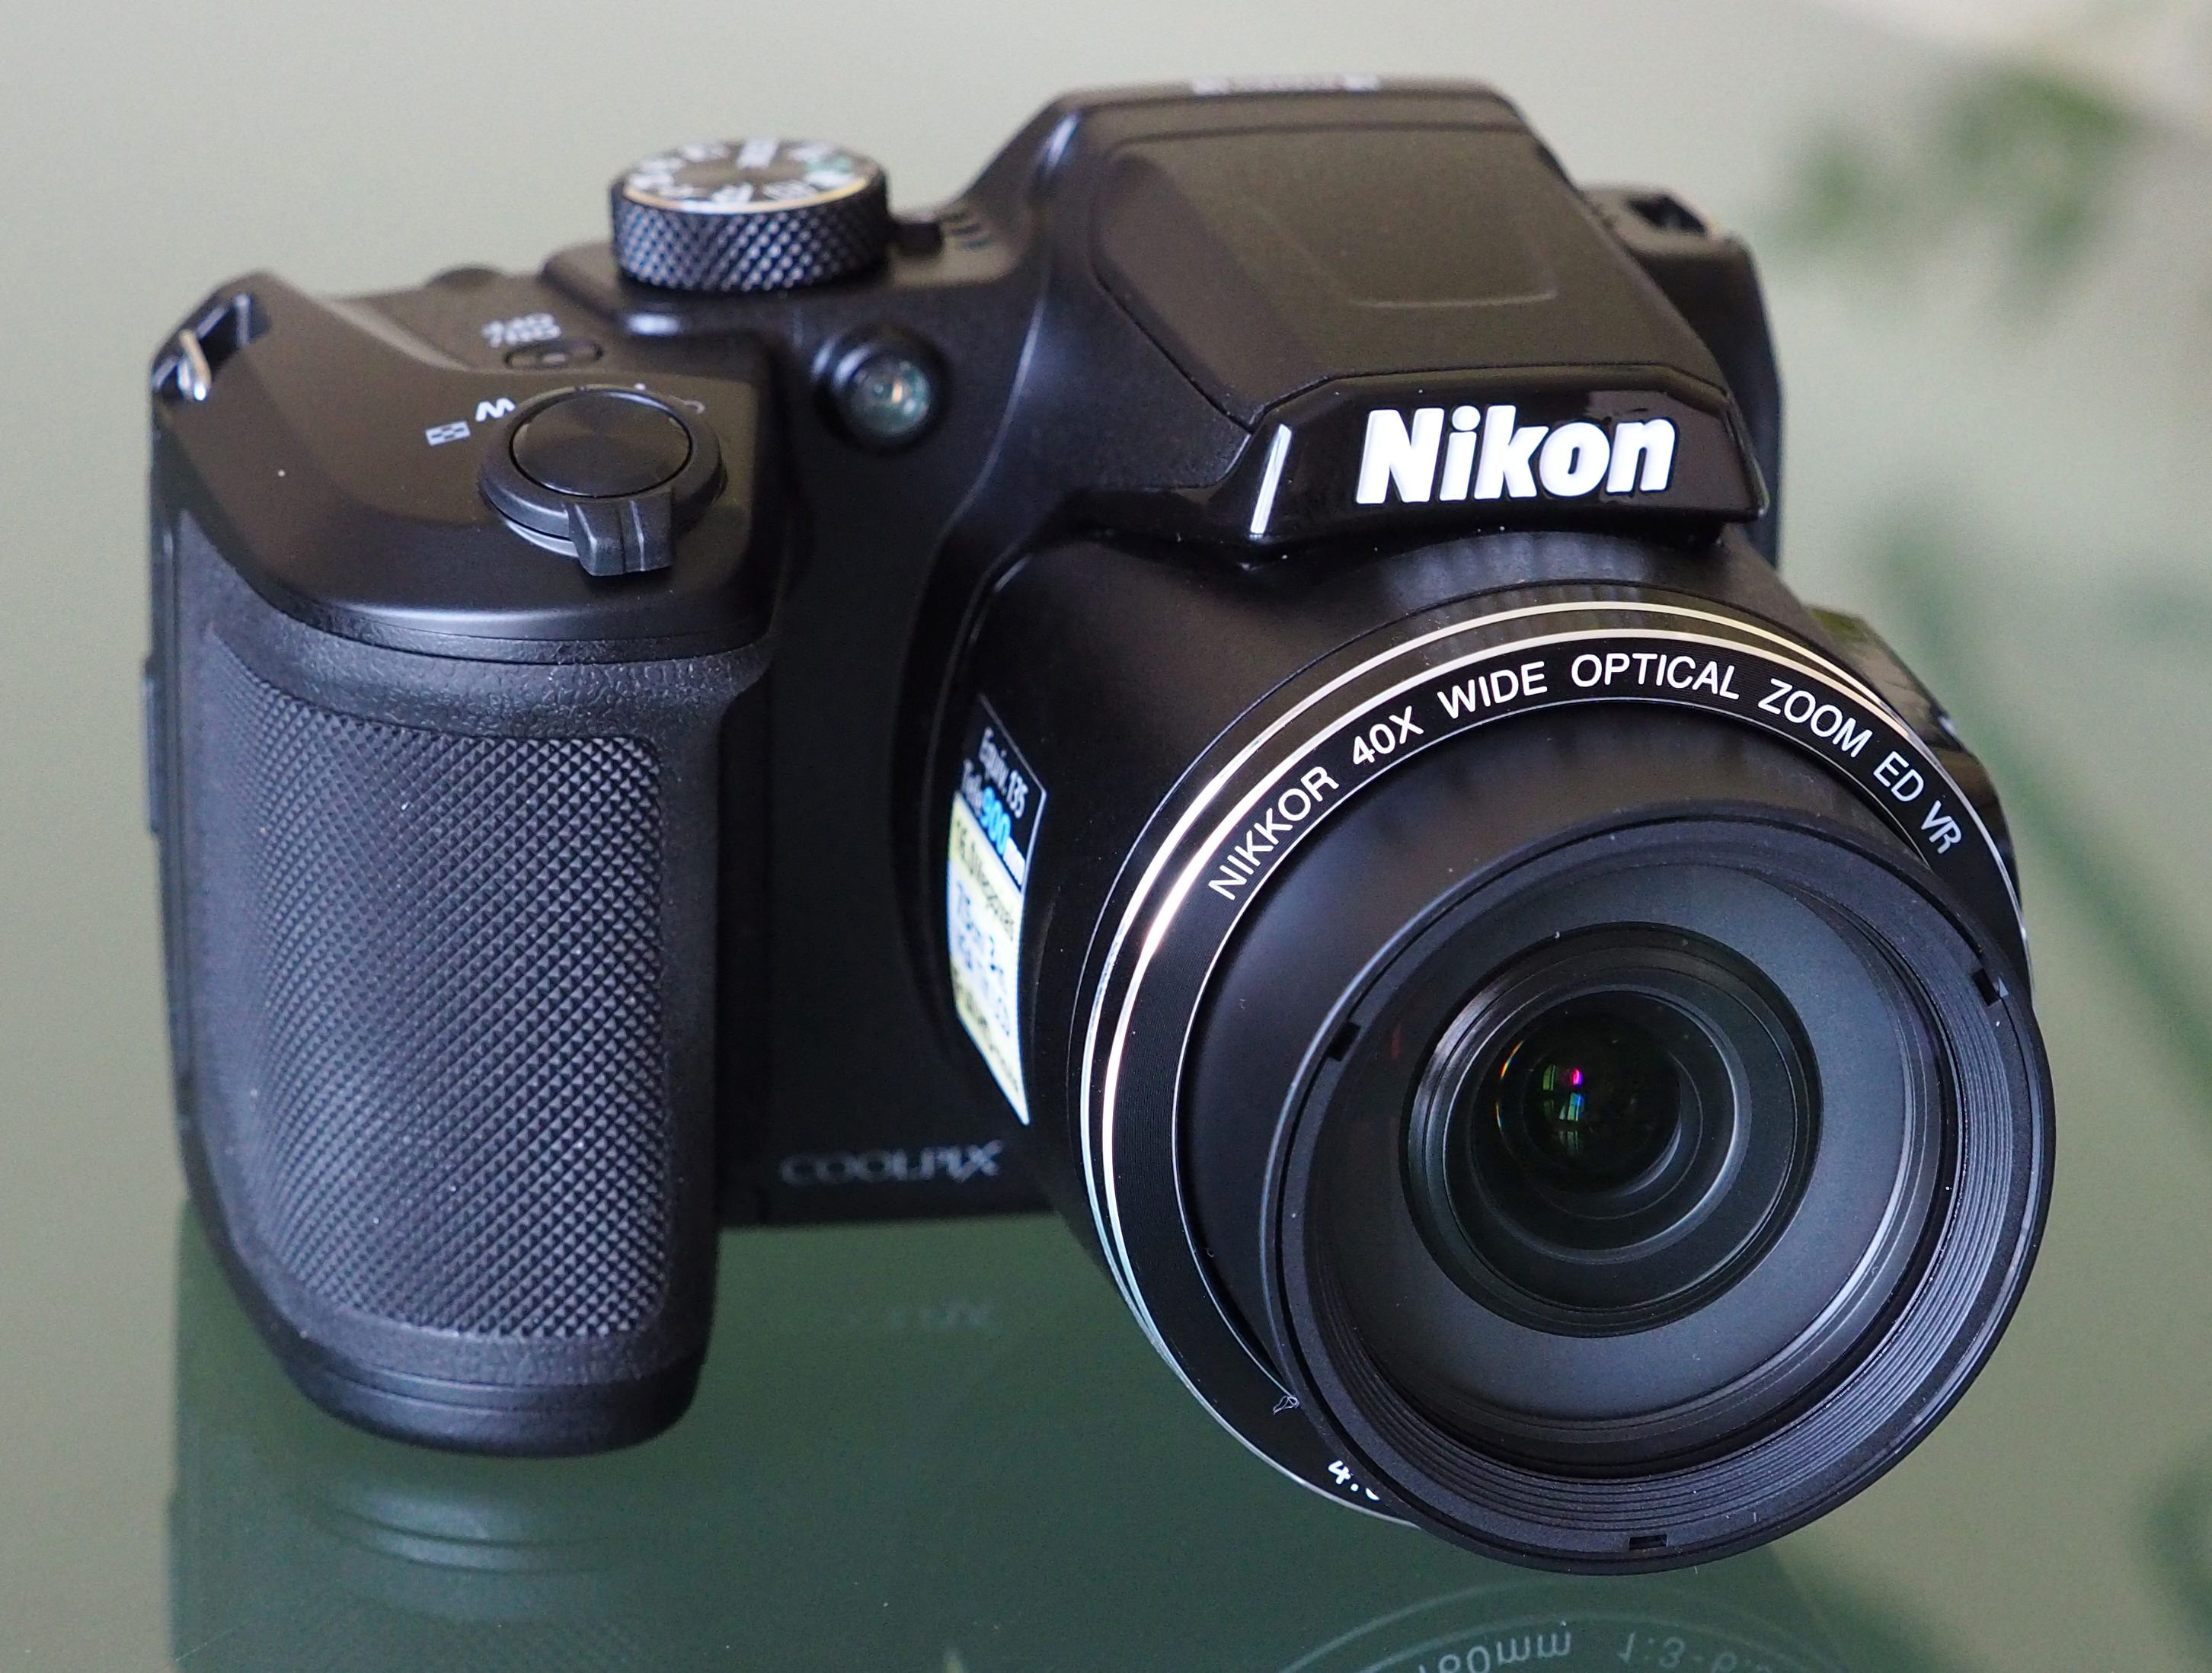 Nikon Coolpix L340 Review: A Disappointing Bridge-style Camera